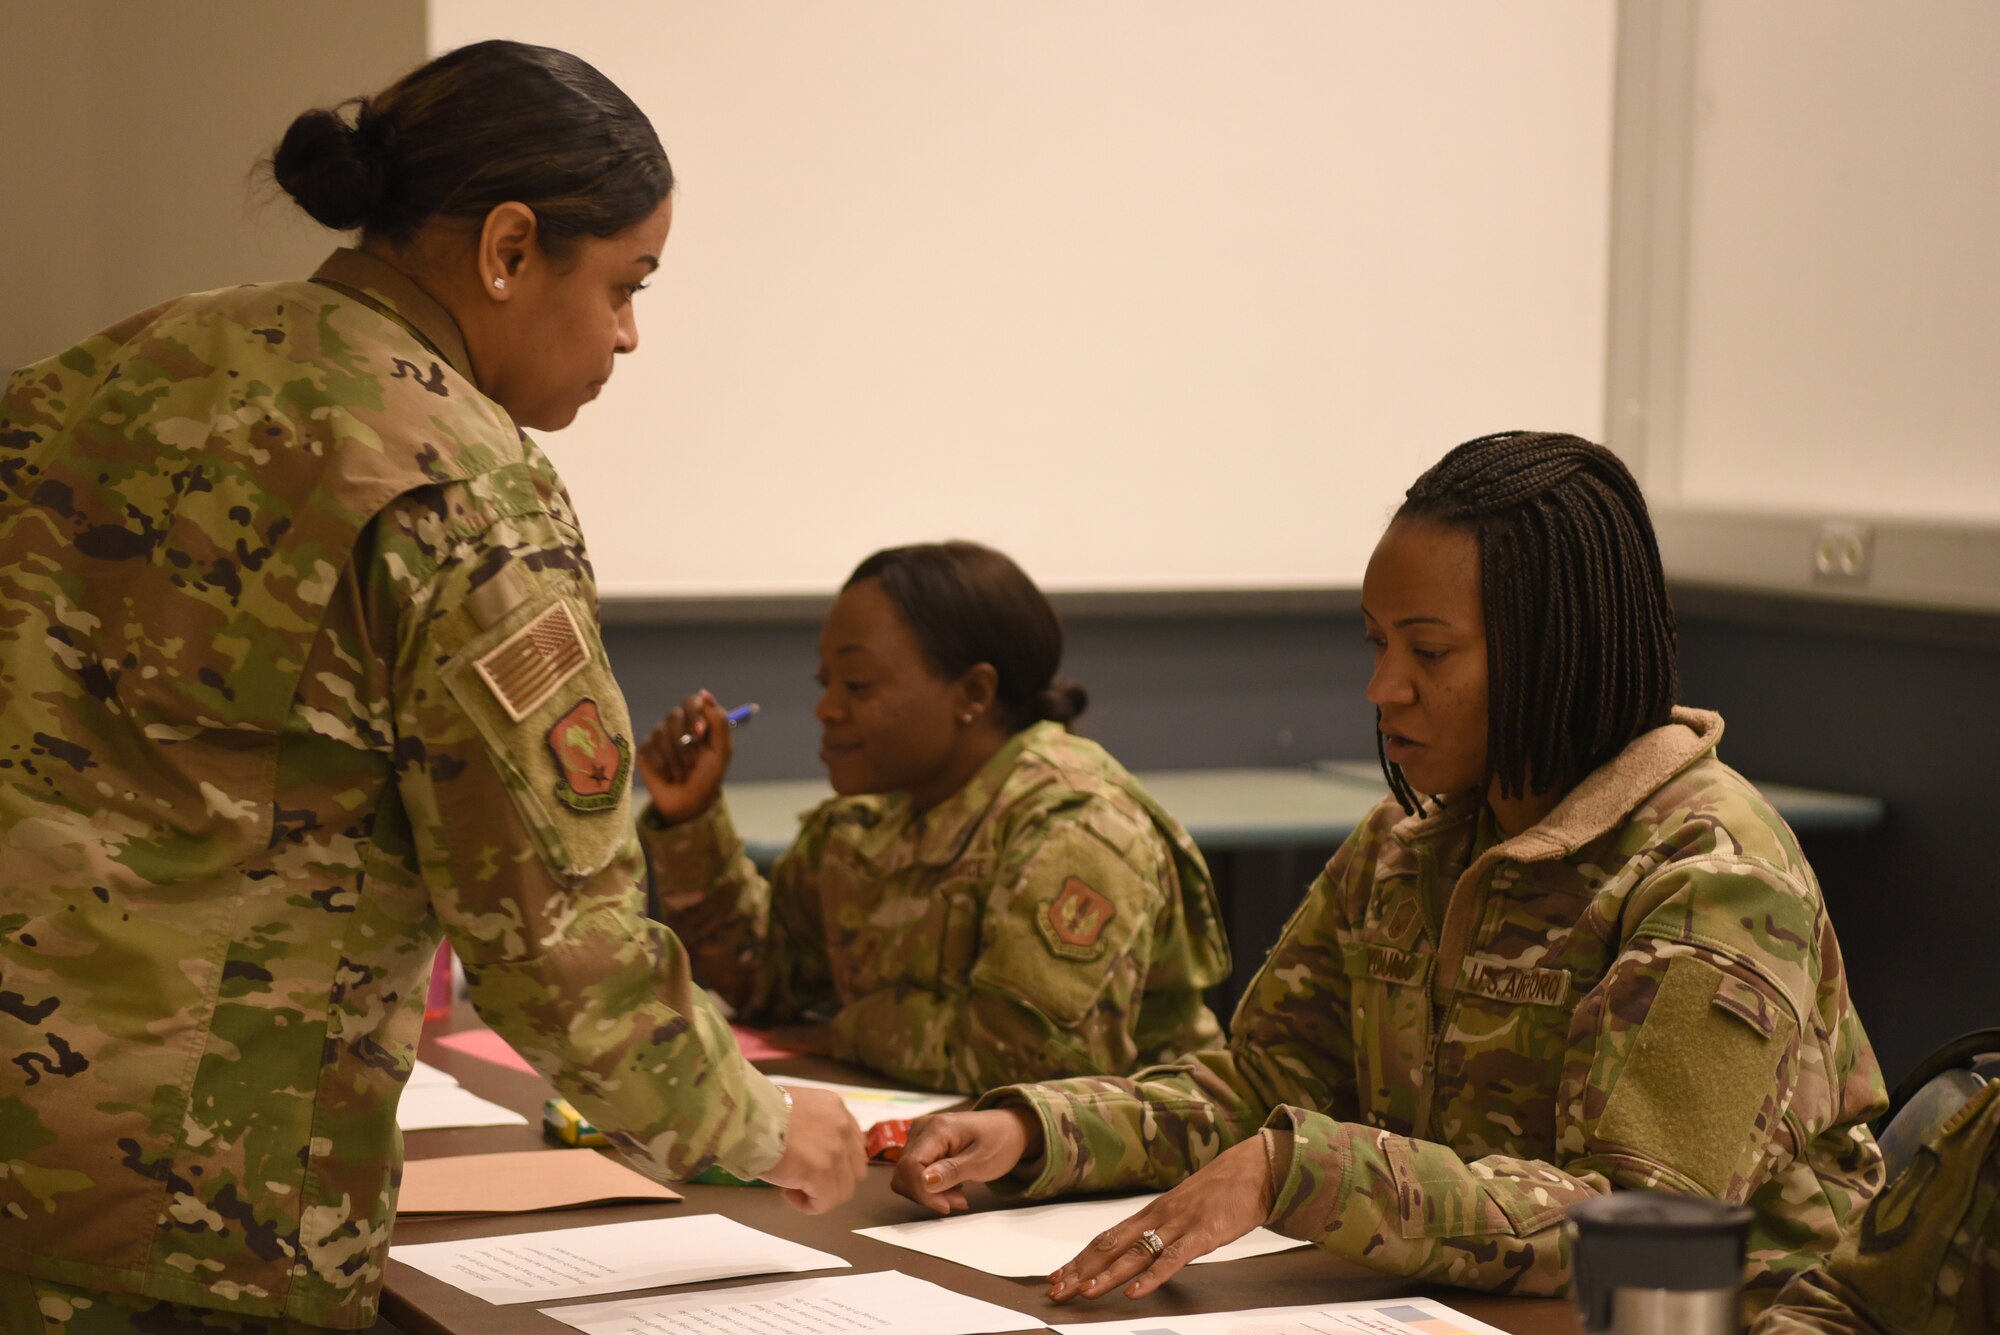 U.S. Air Force Master Sgt. Alejandra Jones, Headquarters U.S. Air Forces Europe-Air Forces Africa commander's quarters staff superintendent, talks with attendees during the monthly Let’s Connect session at the Kaiserslautern Military Community Center, Ramstein Air Base, Germany, Jan. 14, 2020.